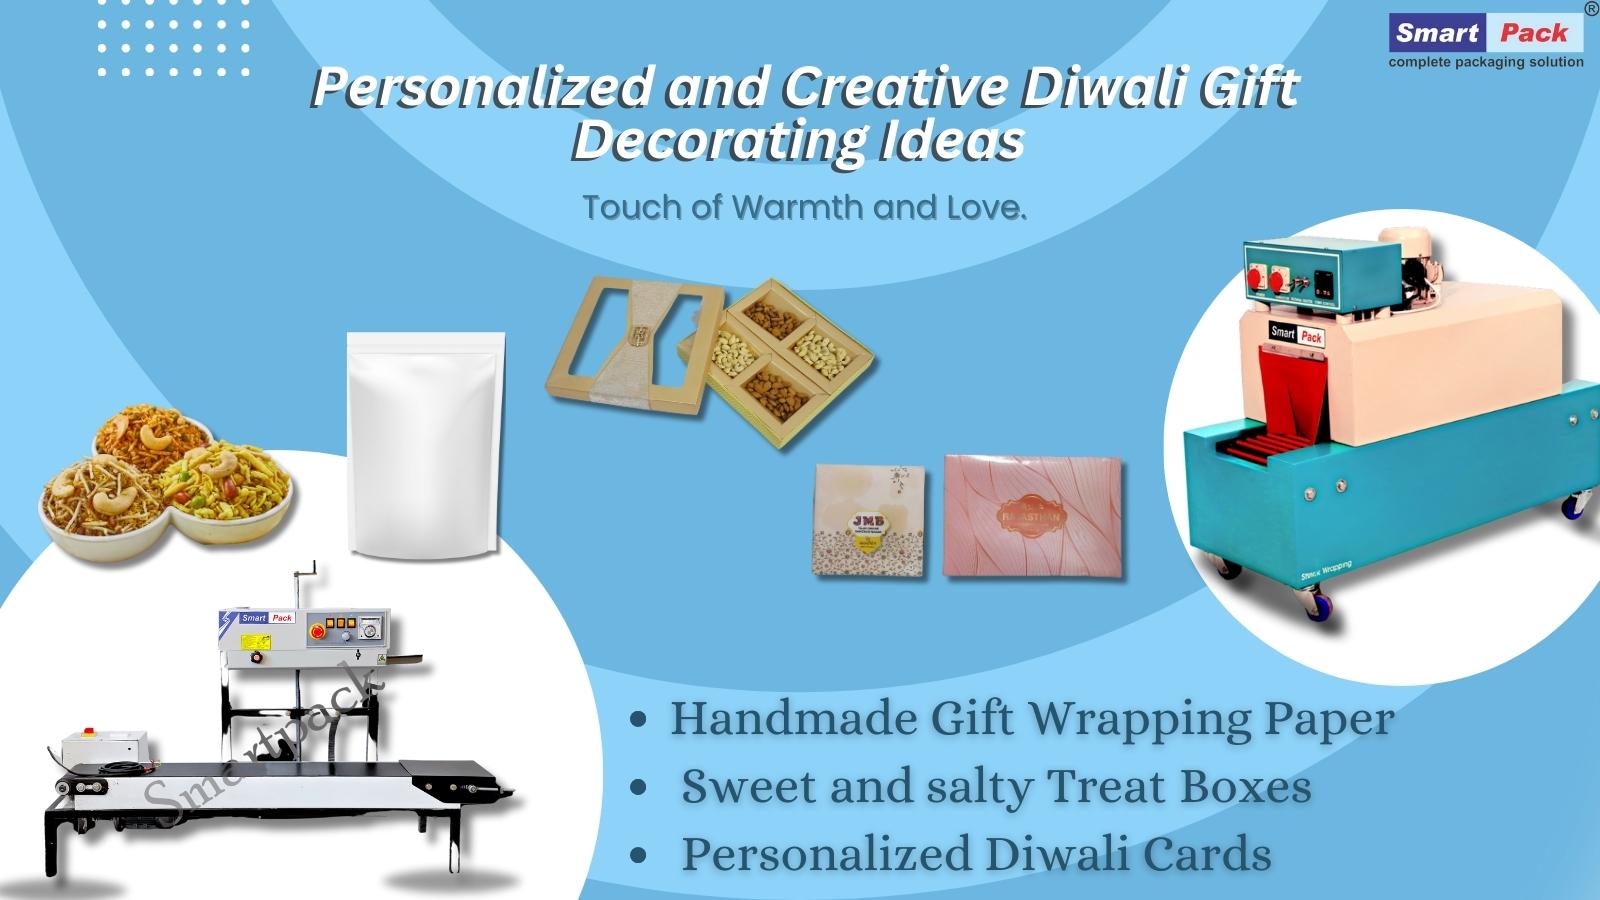 Personalized and Creative Diwali Gift Decorating Ideas